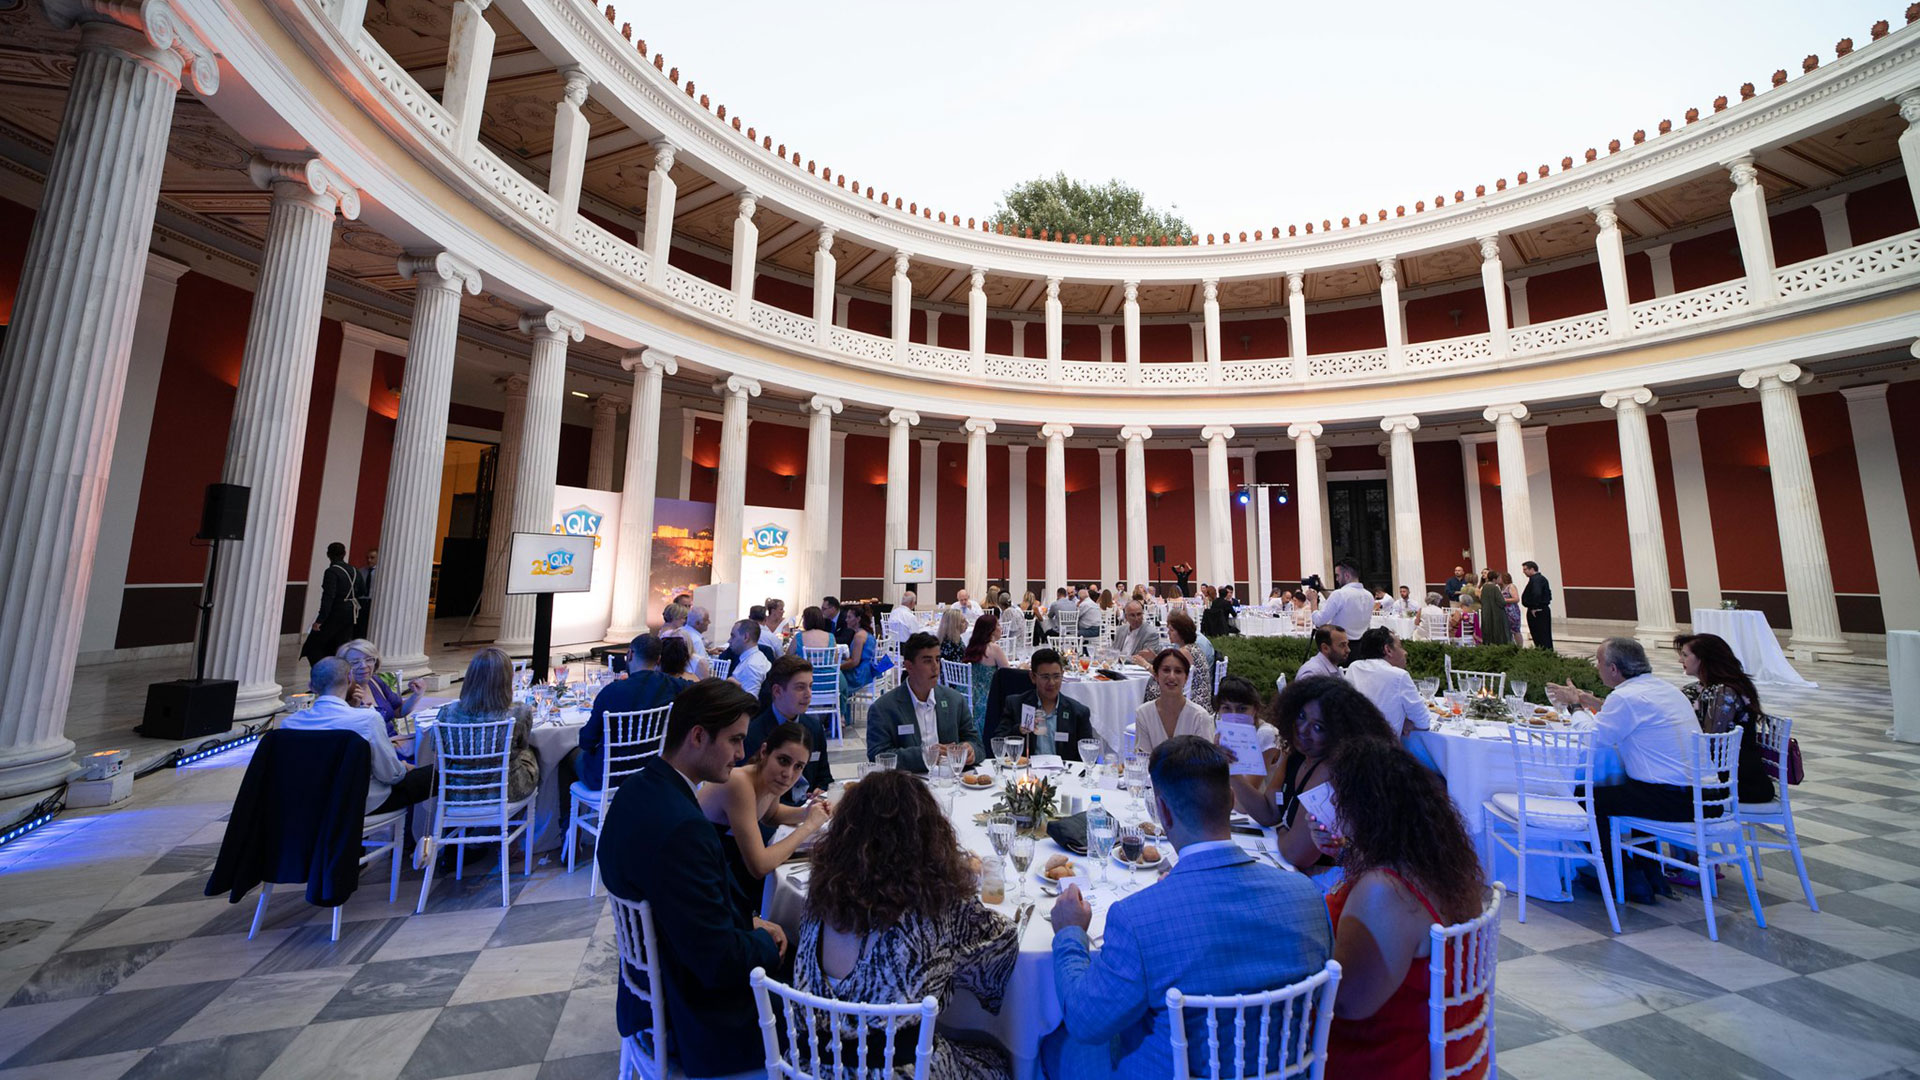 QLS Celebrated Its 20th Anniversary at Zappeion Hall